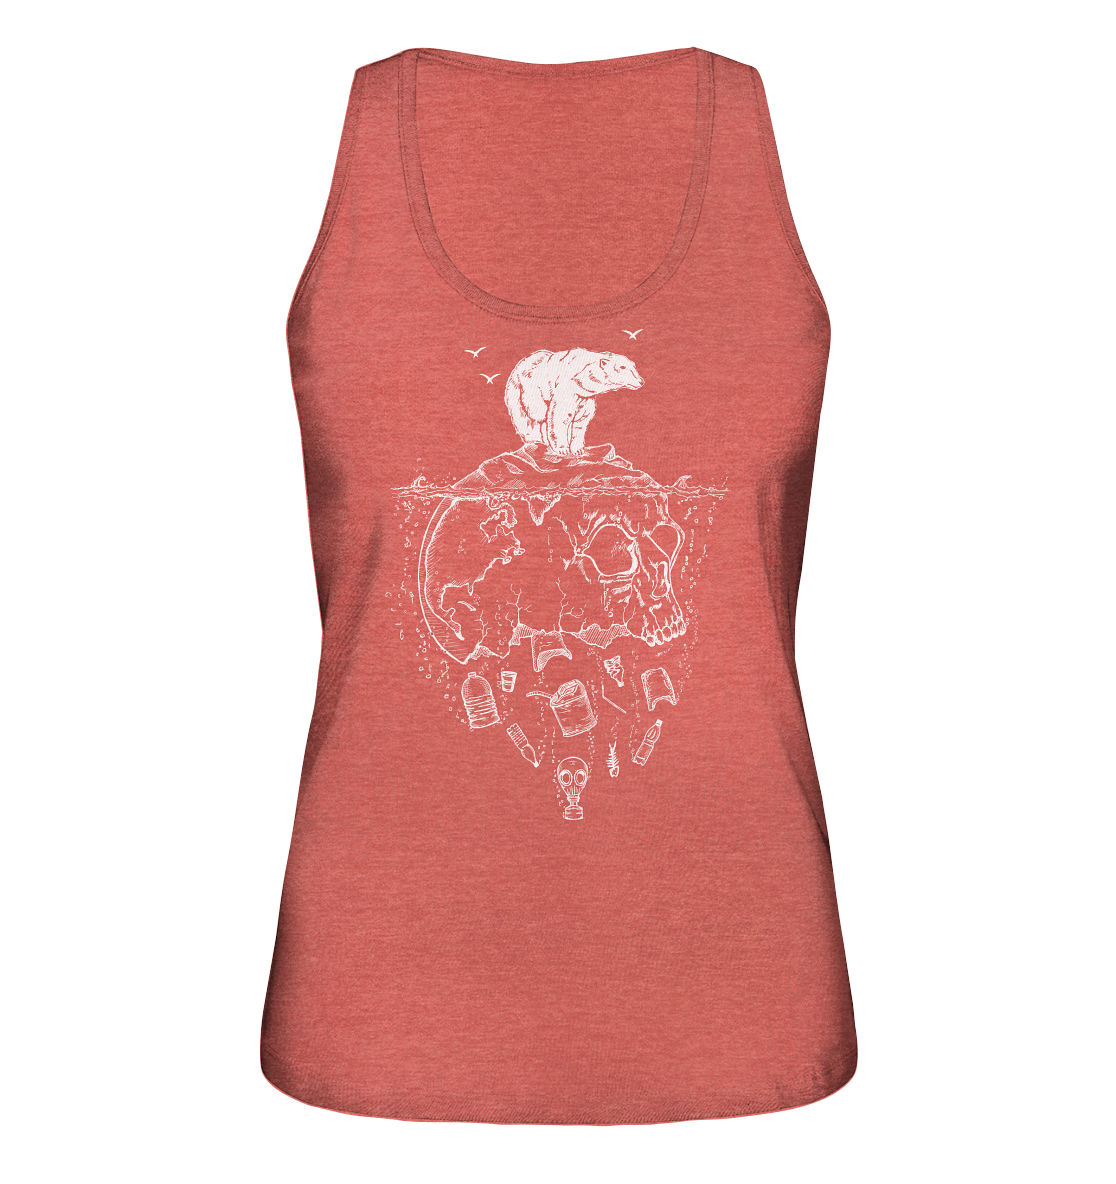 front-ladies-organic-tank-top-e05651-1116x-7.png